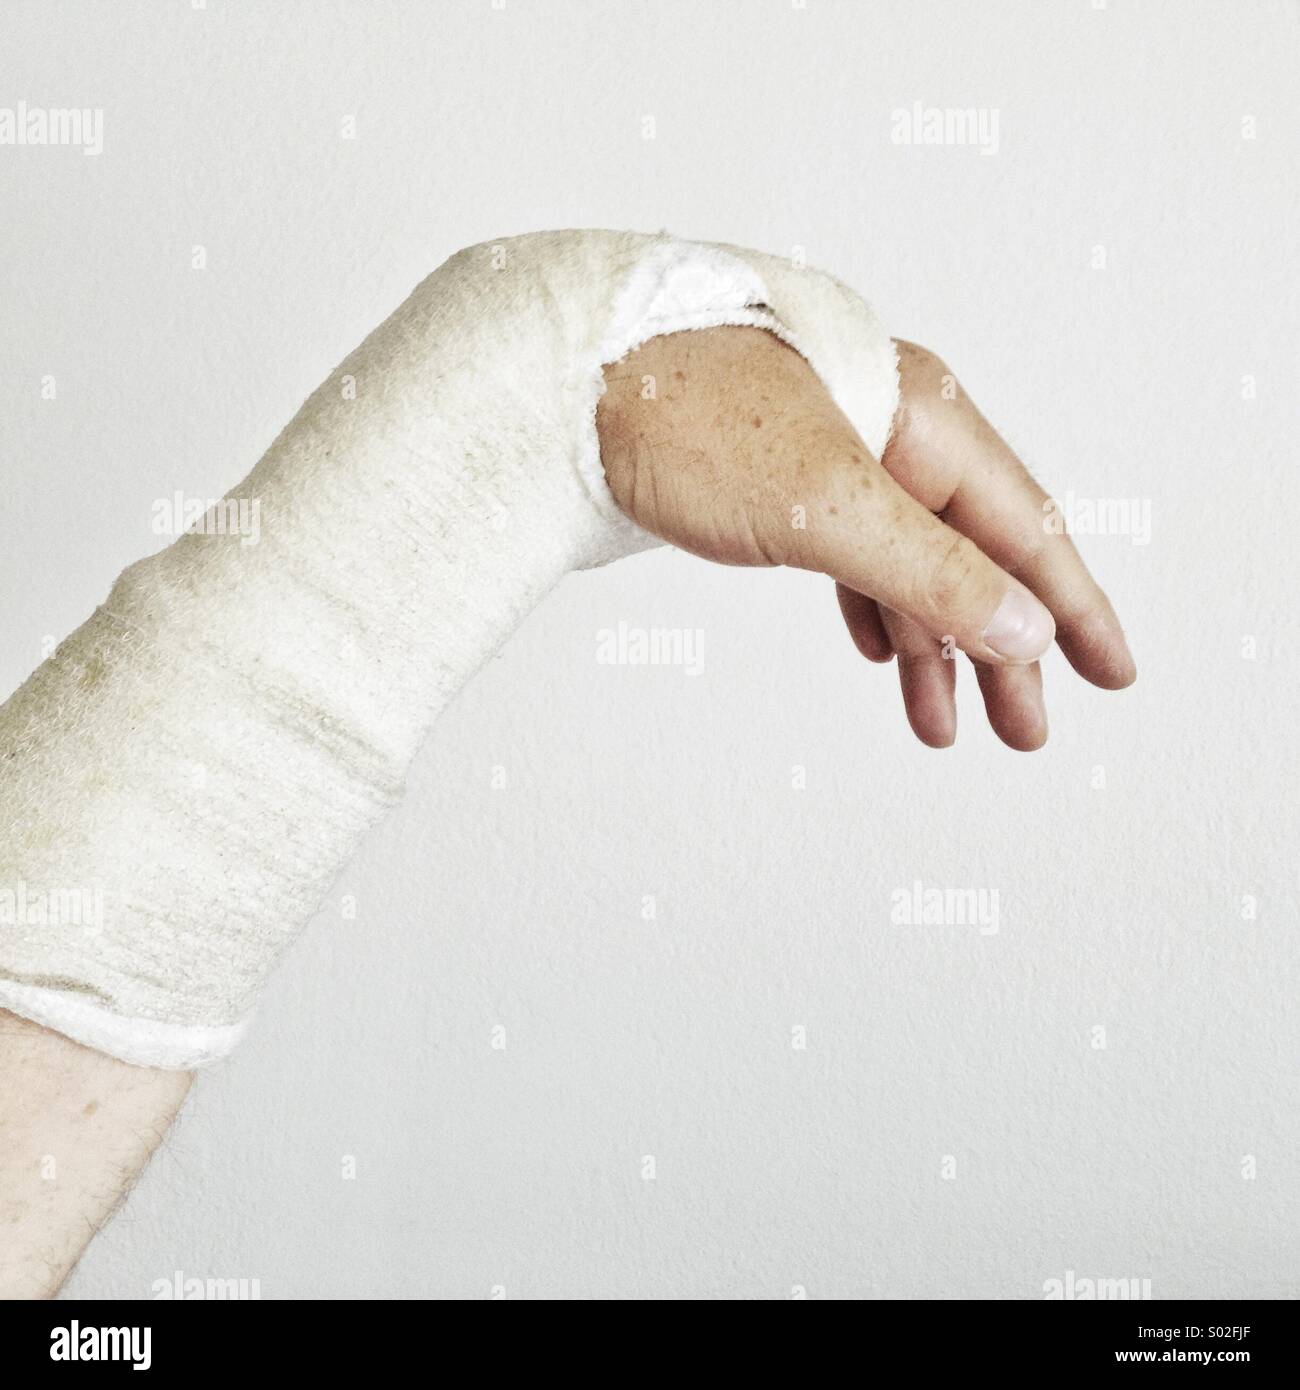 Broken wrist with a plaster cast. Stock Photo